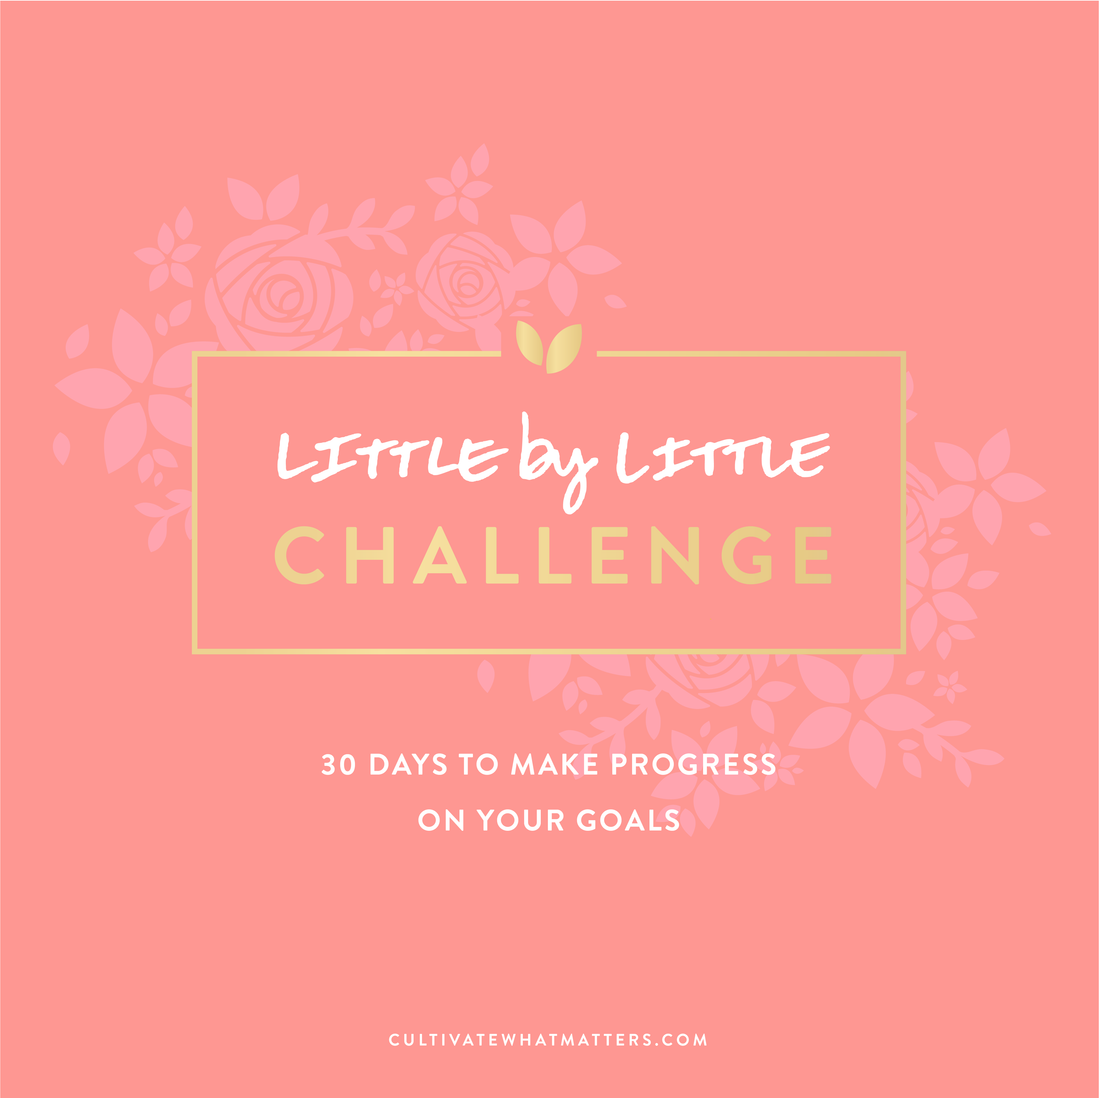 30 Ways to Make Progress on Your Goals with the Little by Little Challenge